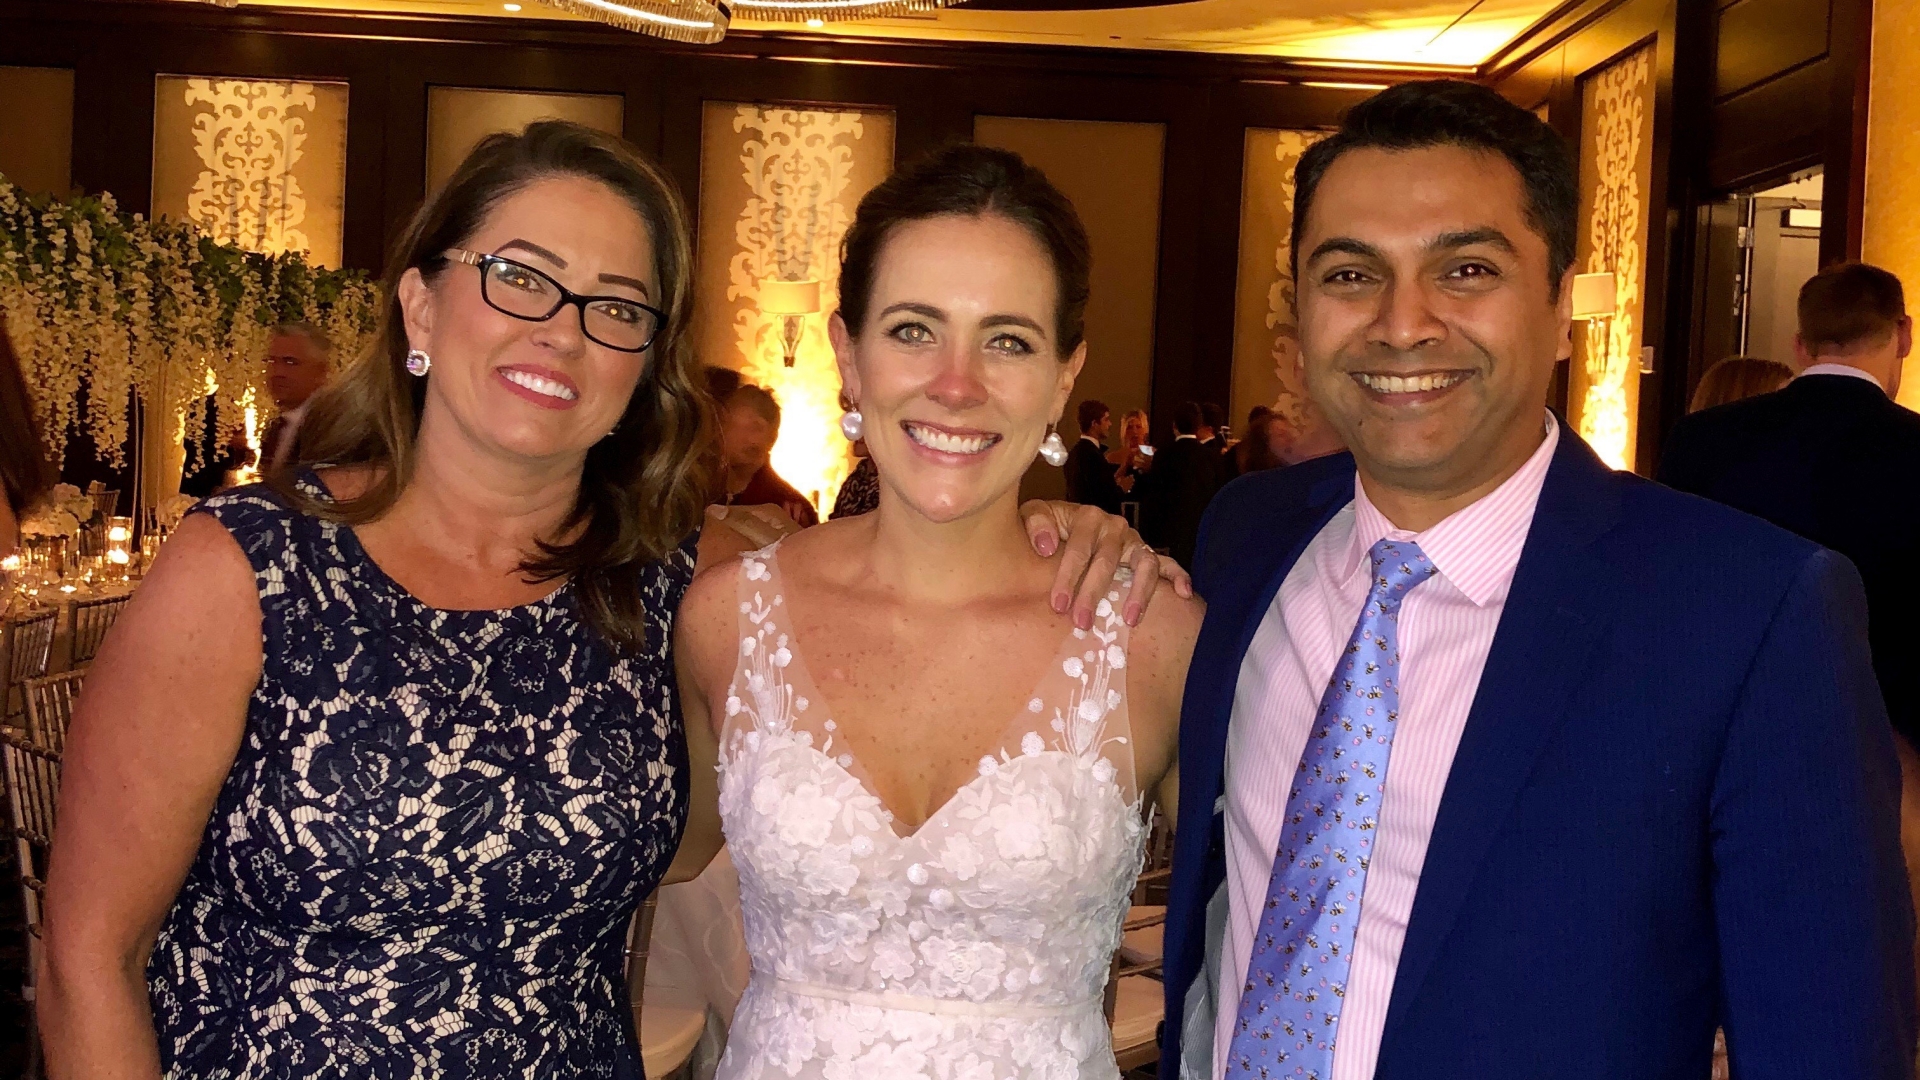 After 11 years of dating, a fierce battle with Hodgkin’s lymphoma, and multiple rounds of chemotherapy, including stem cell transplant, Mary Stanton tied the knot with high school sweetheart, Matthew Mills, in August 2019. Learn how their love conquered all and why Mary Stanton credits her care team at Levine Cancer Institute for enabling her to live the life she has today.